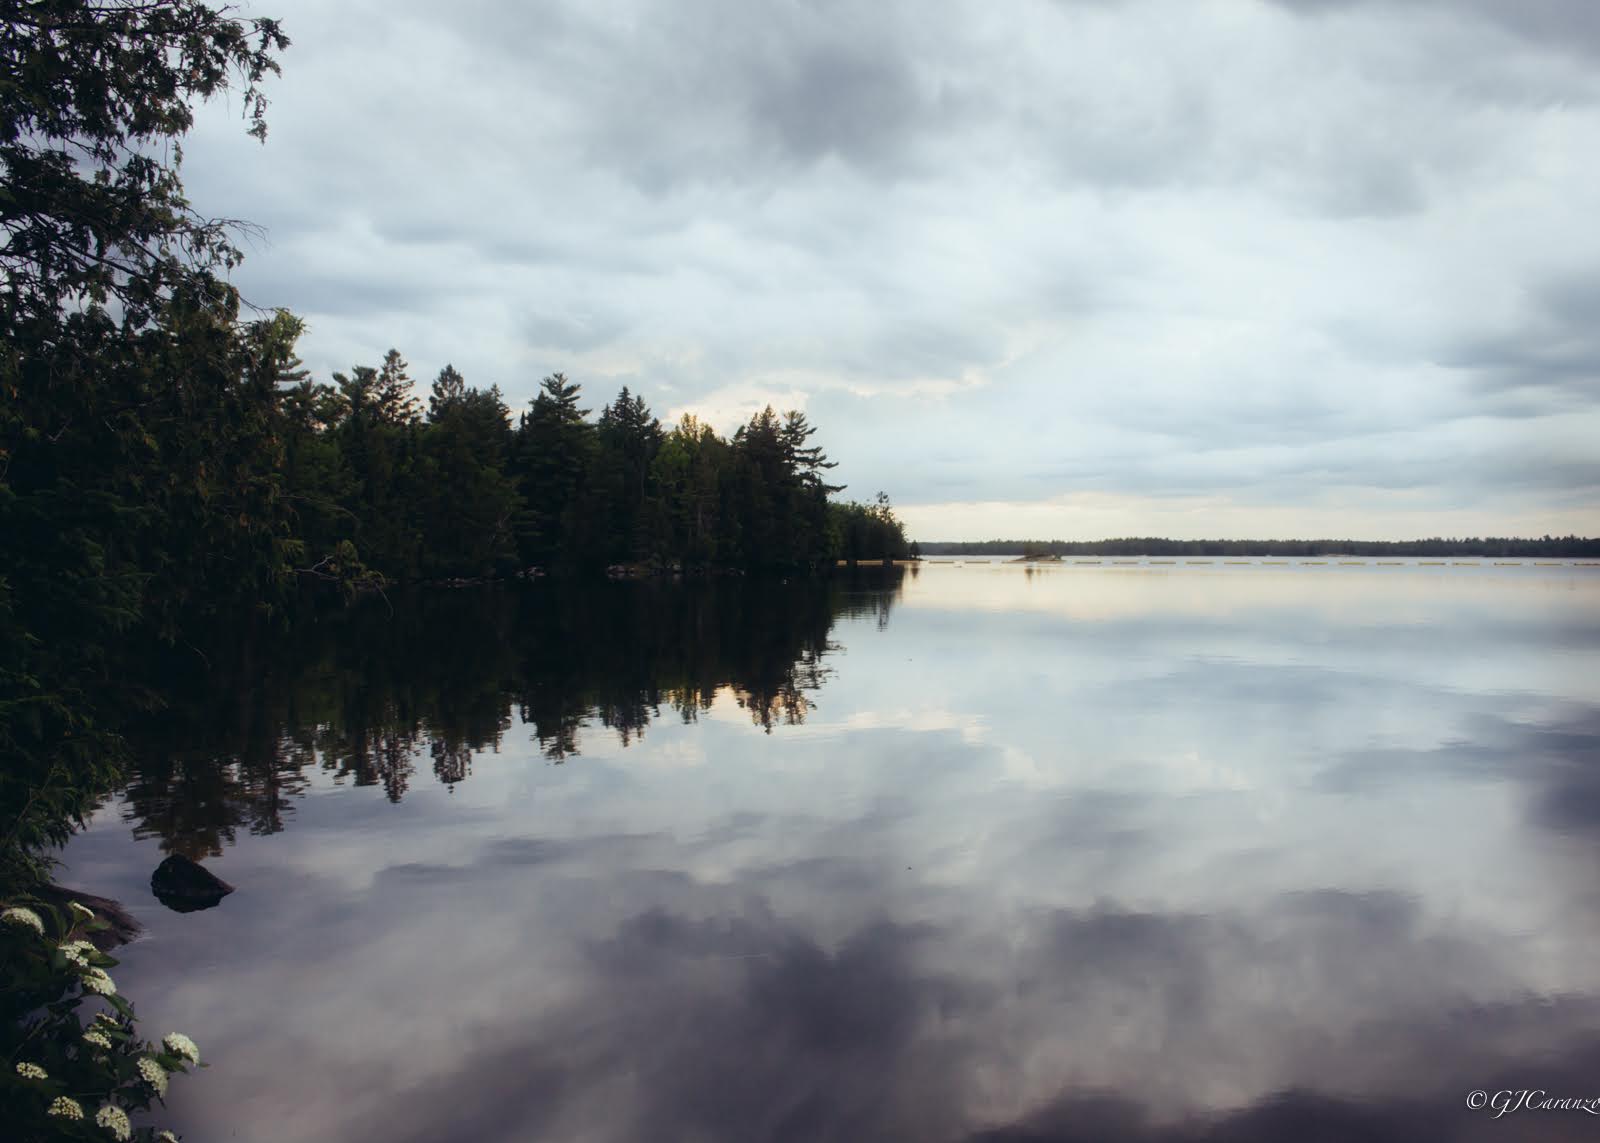 Morris Island Conservation Area: A Short Day Trip from Ottawa, Ontario